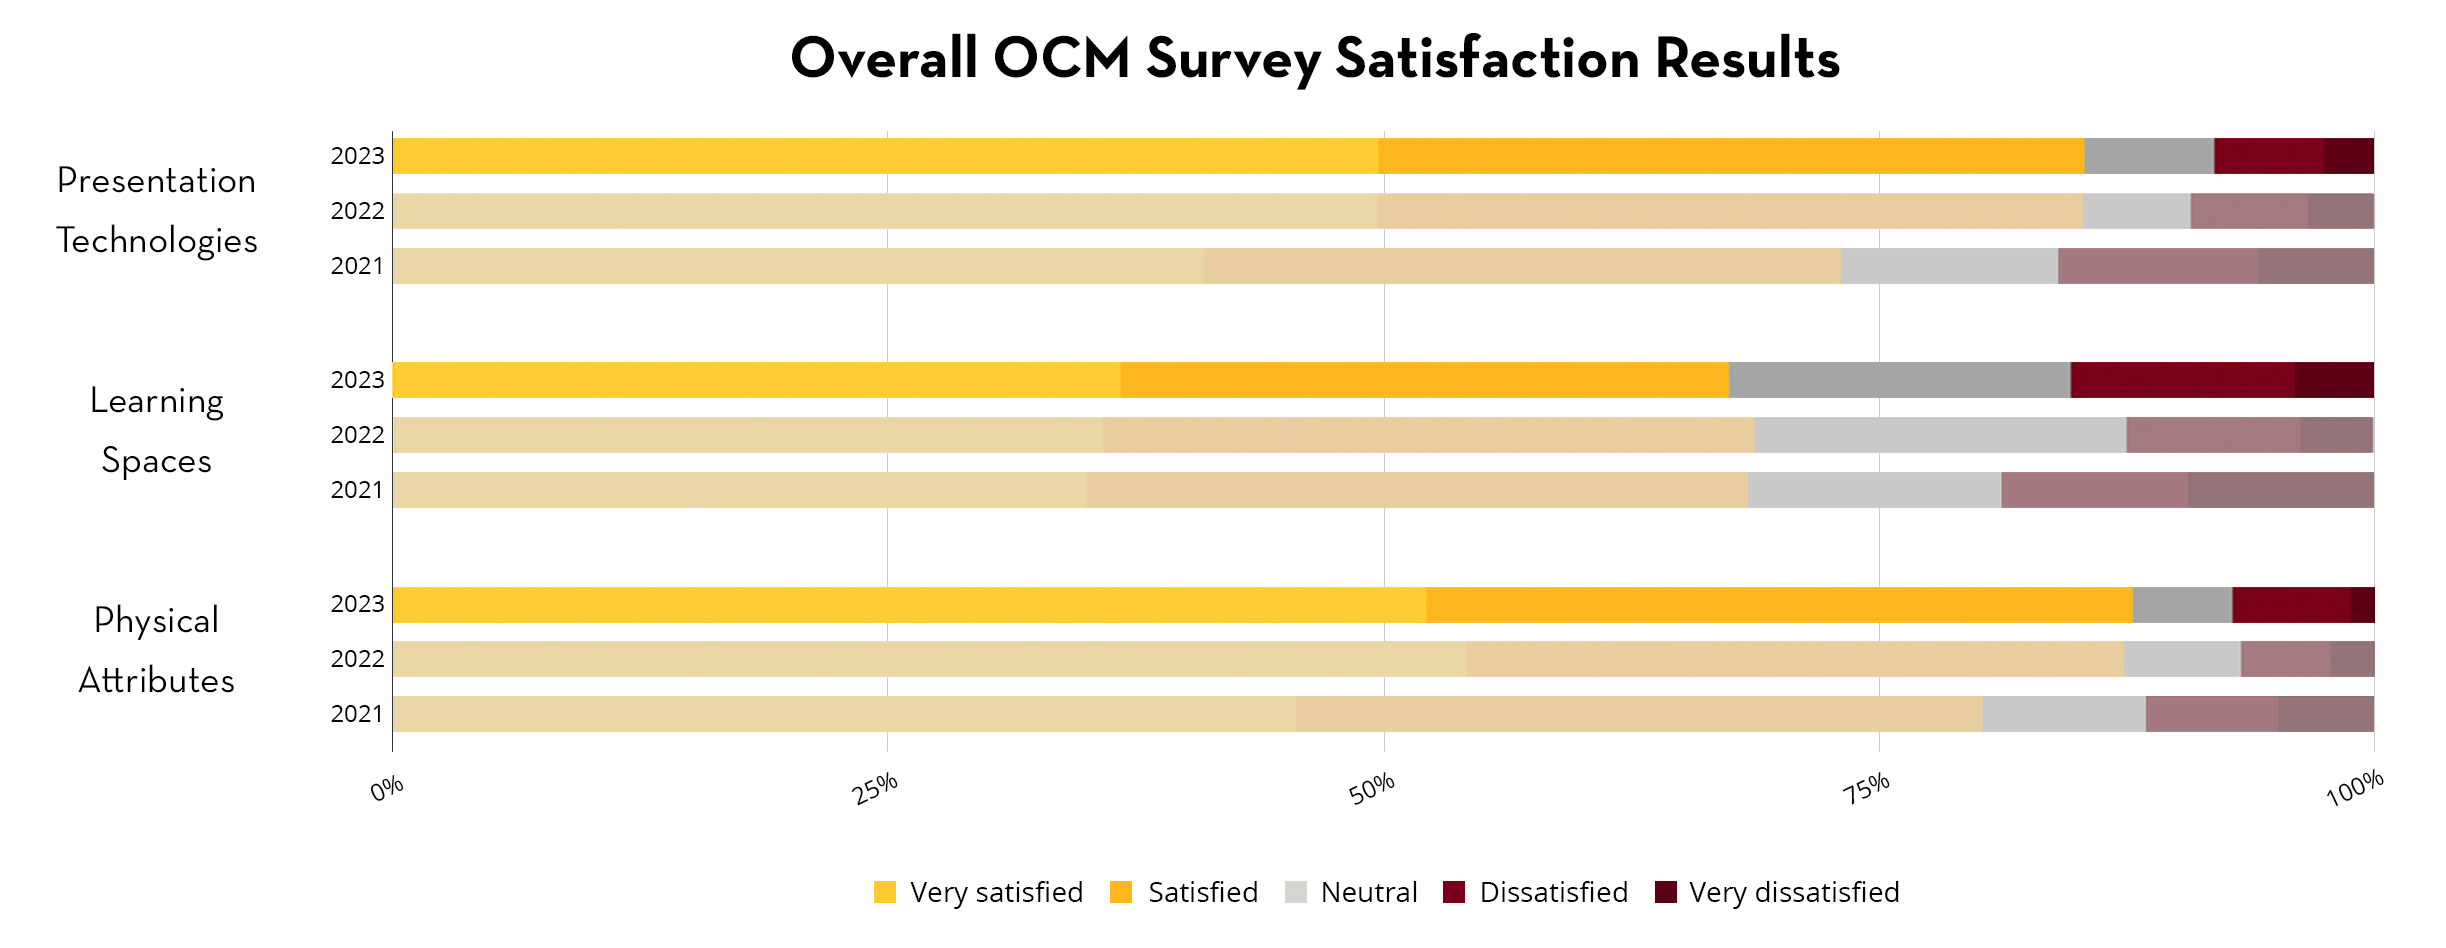 Overall OCM Survey Satisfaction Results between 2021 and 2023